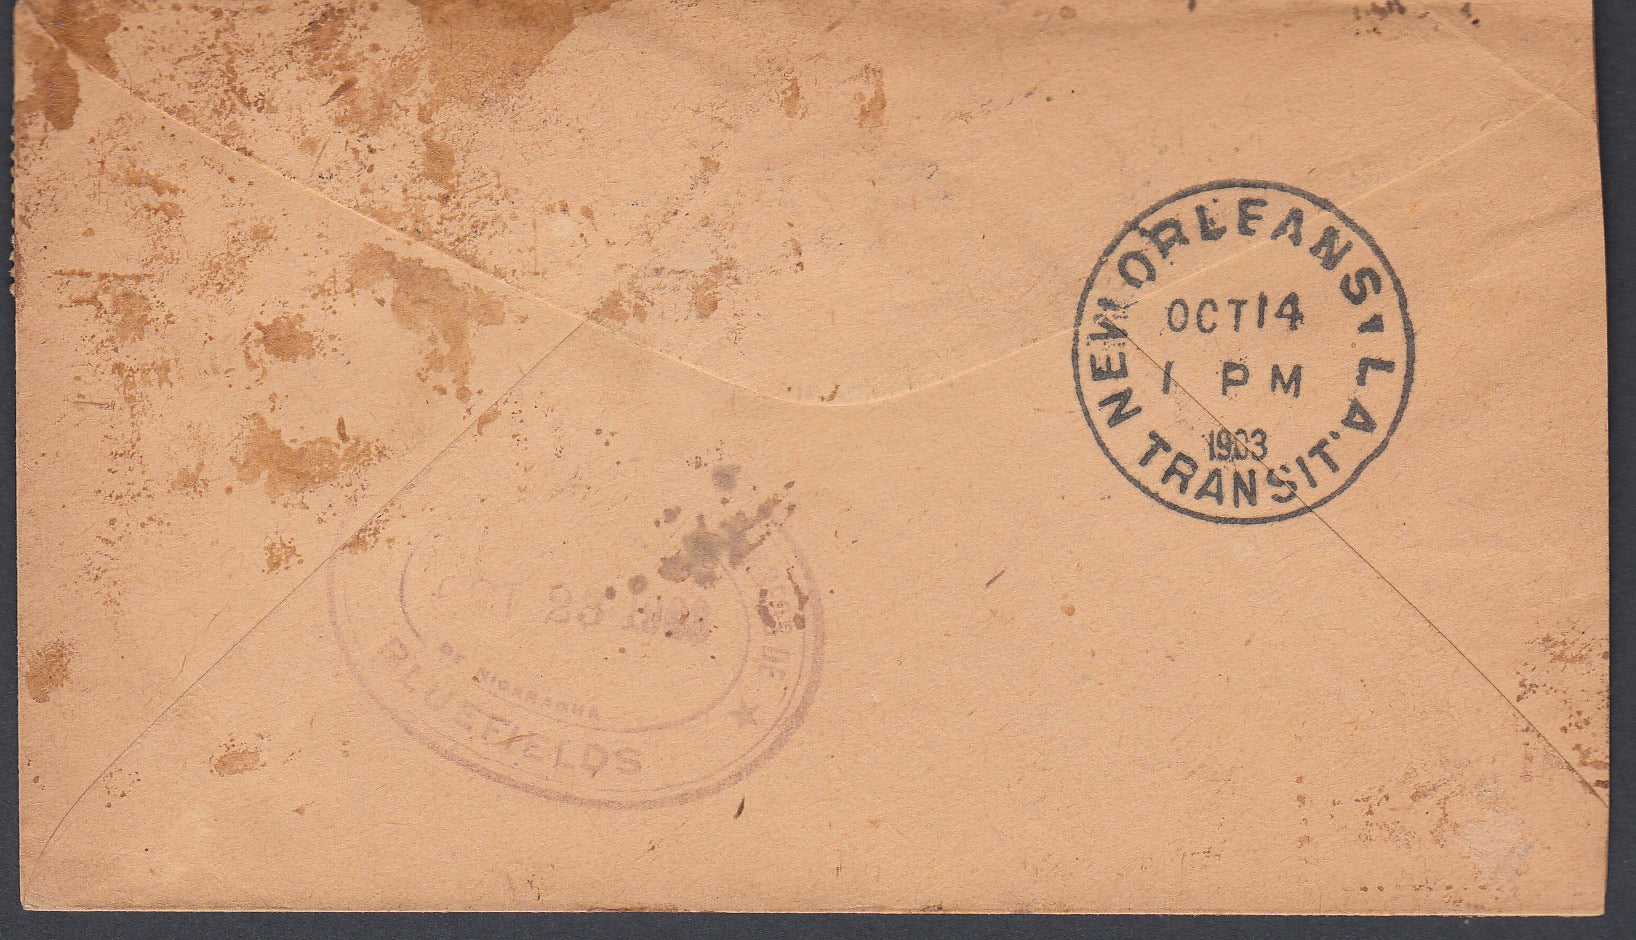 Nicaragua 1903 Postage Due Unpaid Cover from Philadelphia to Bluefields, tied with Scott 151a